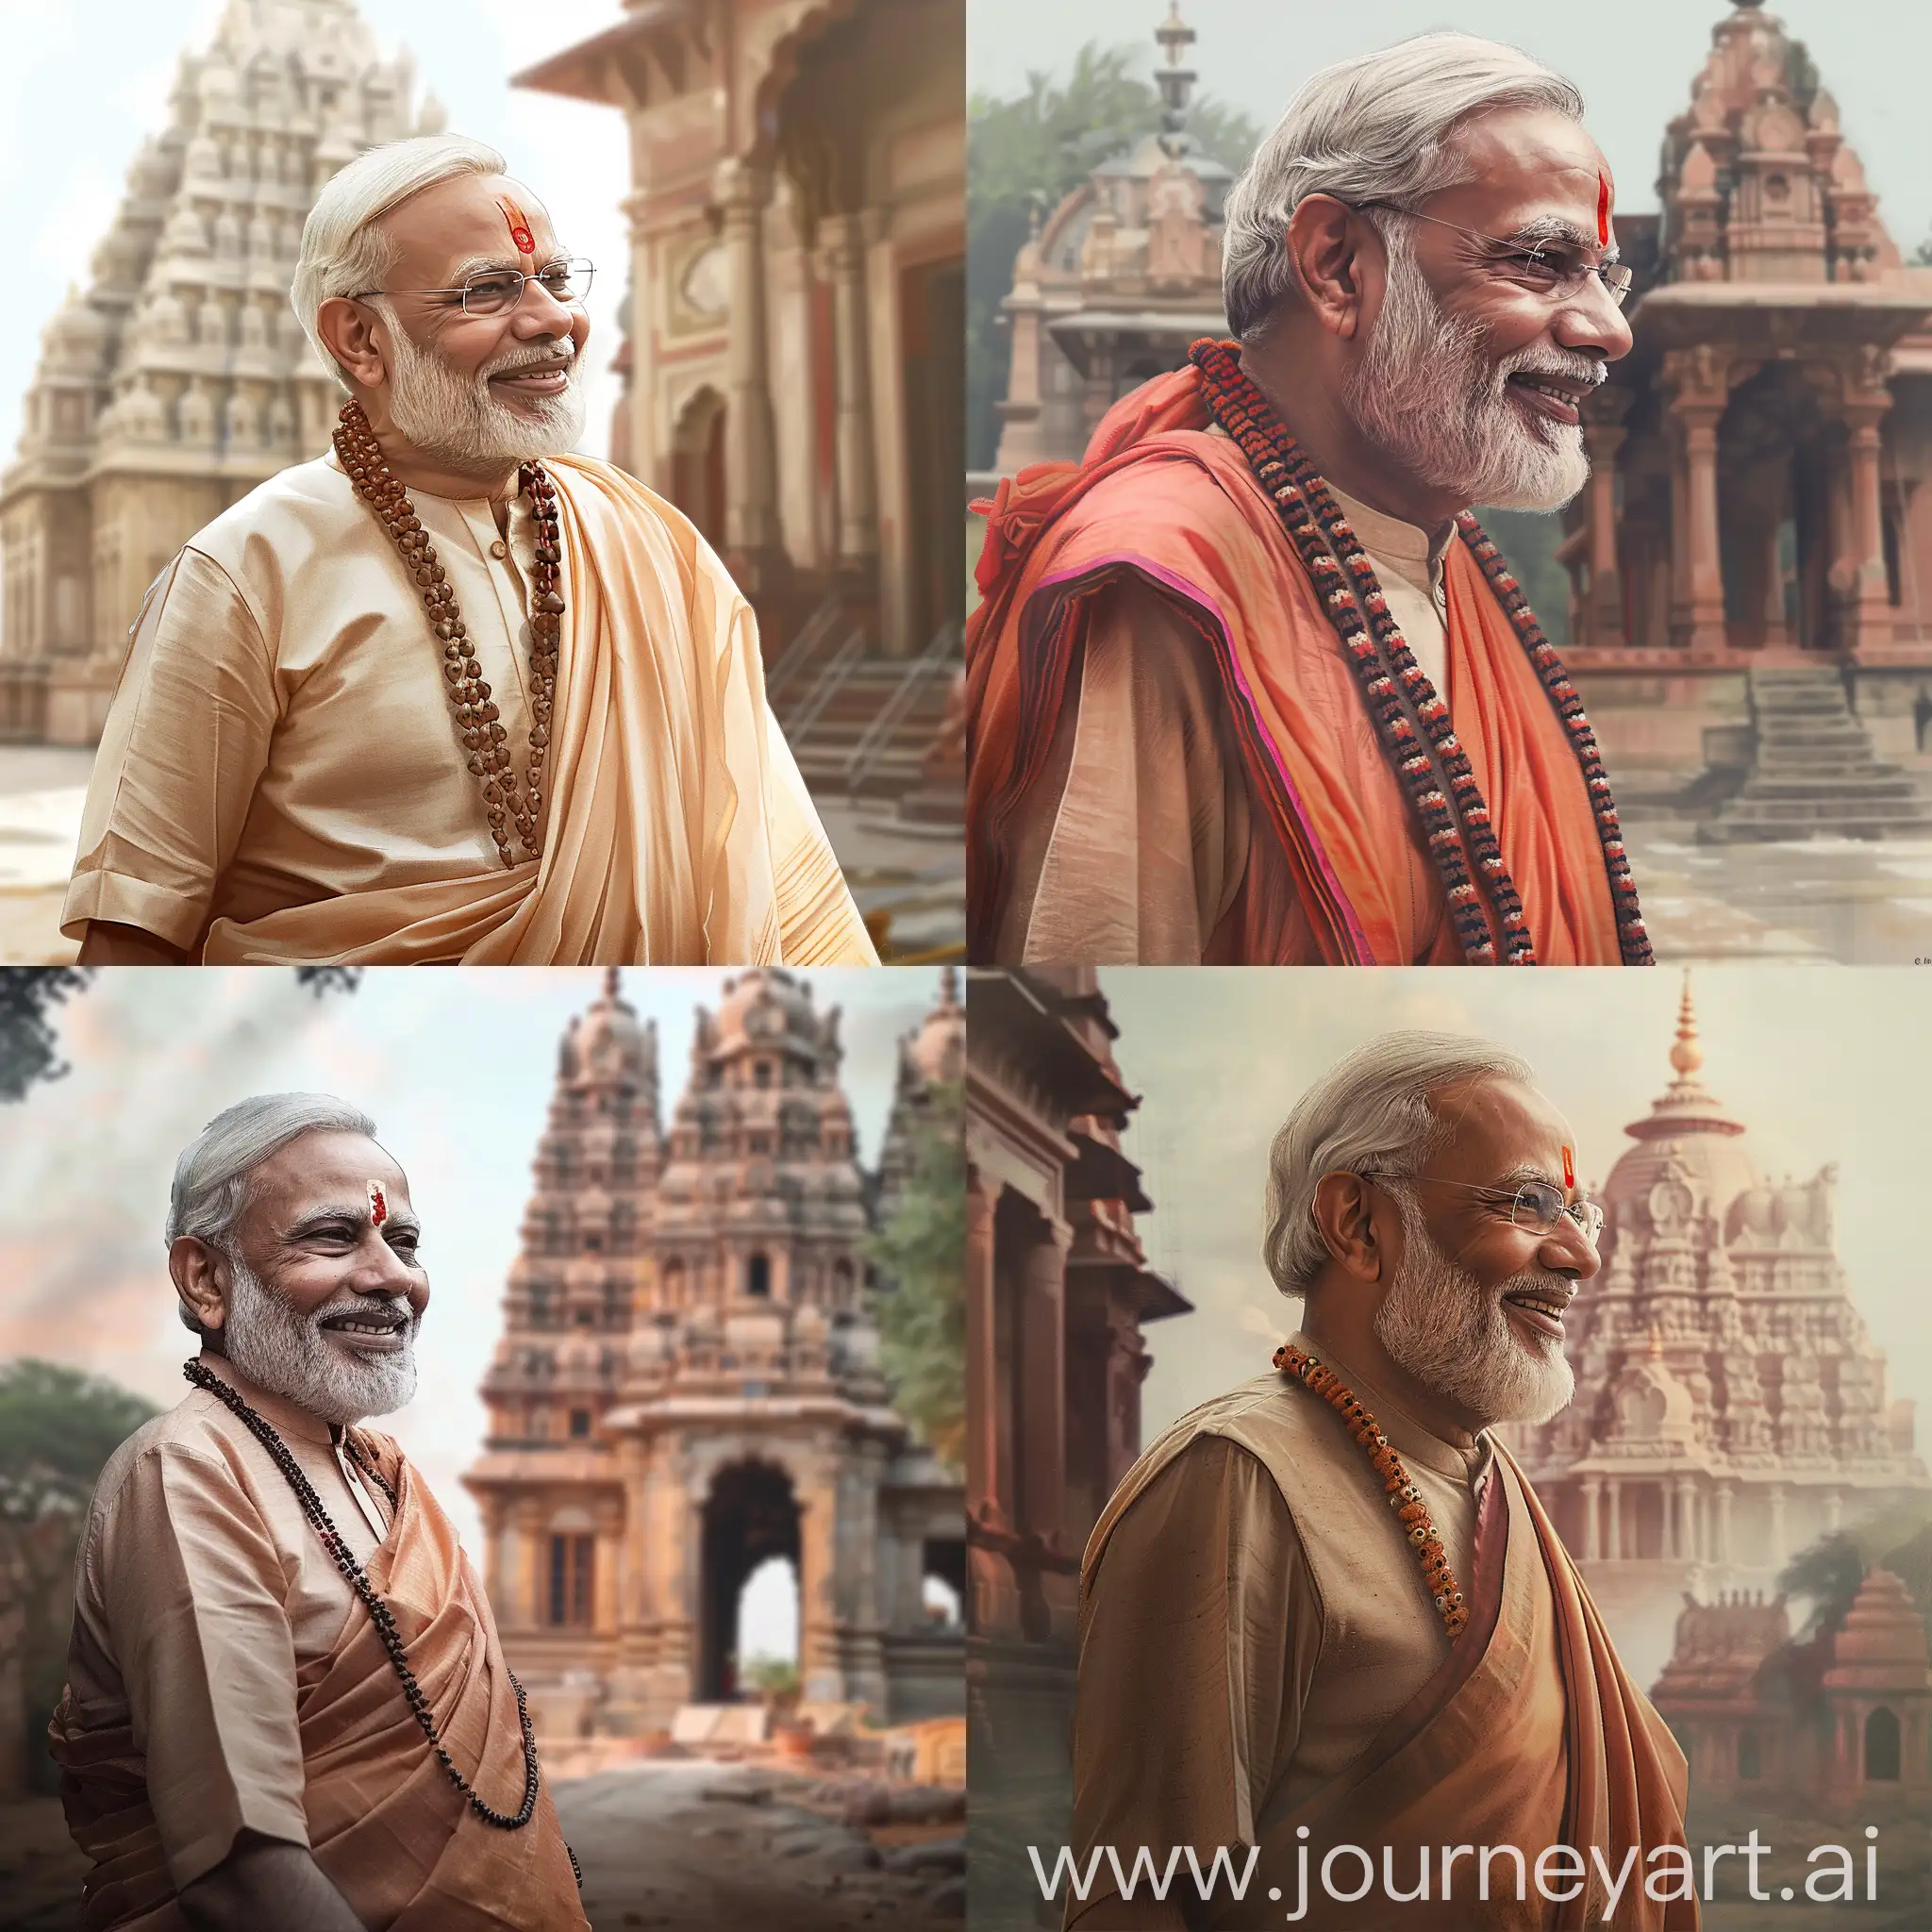 Narendra-Modi-Portrait-Saintly-Smile-in-Traditional-Hindu-Attire-with-Temple-Background